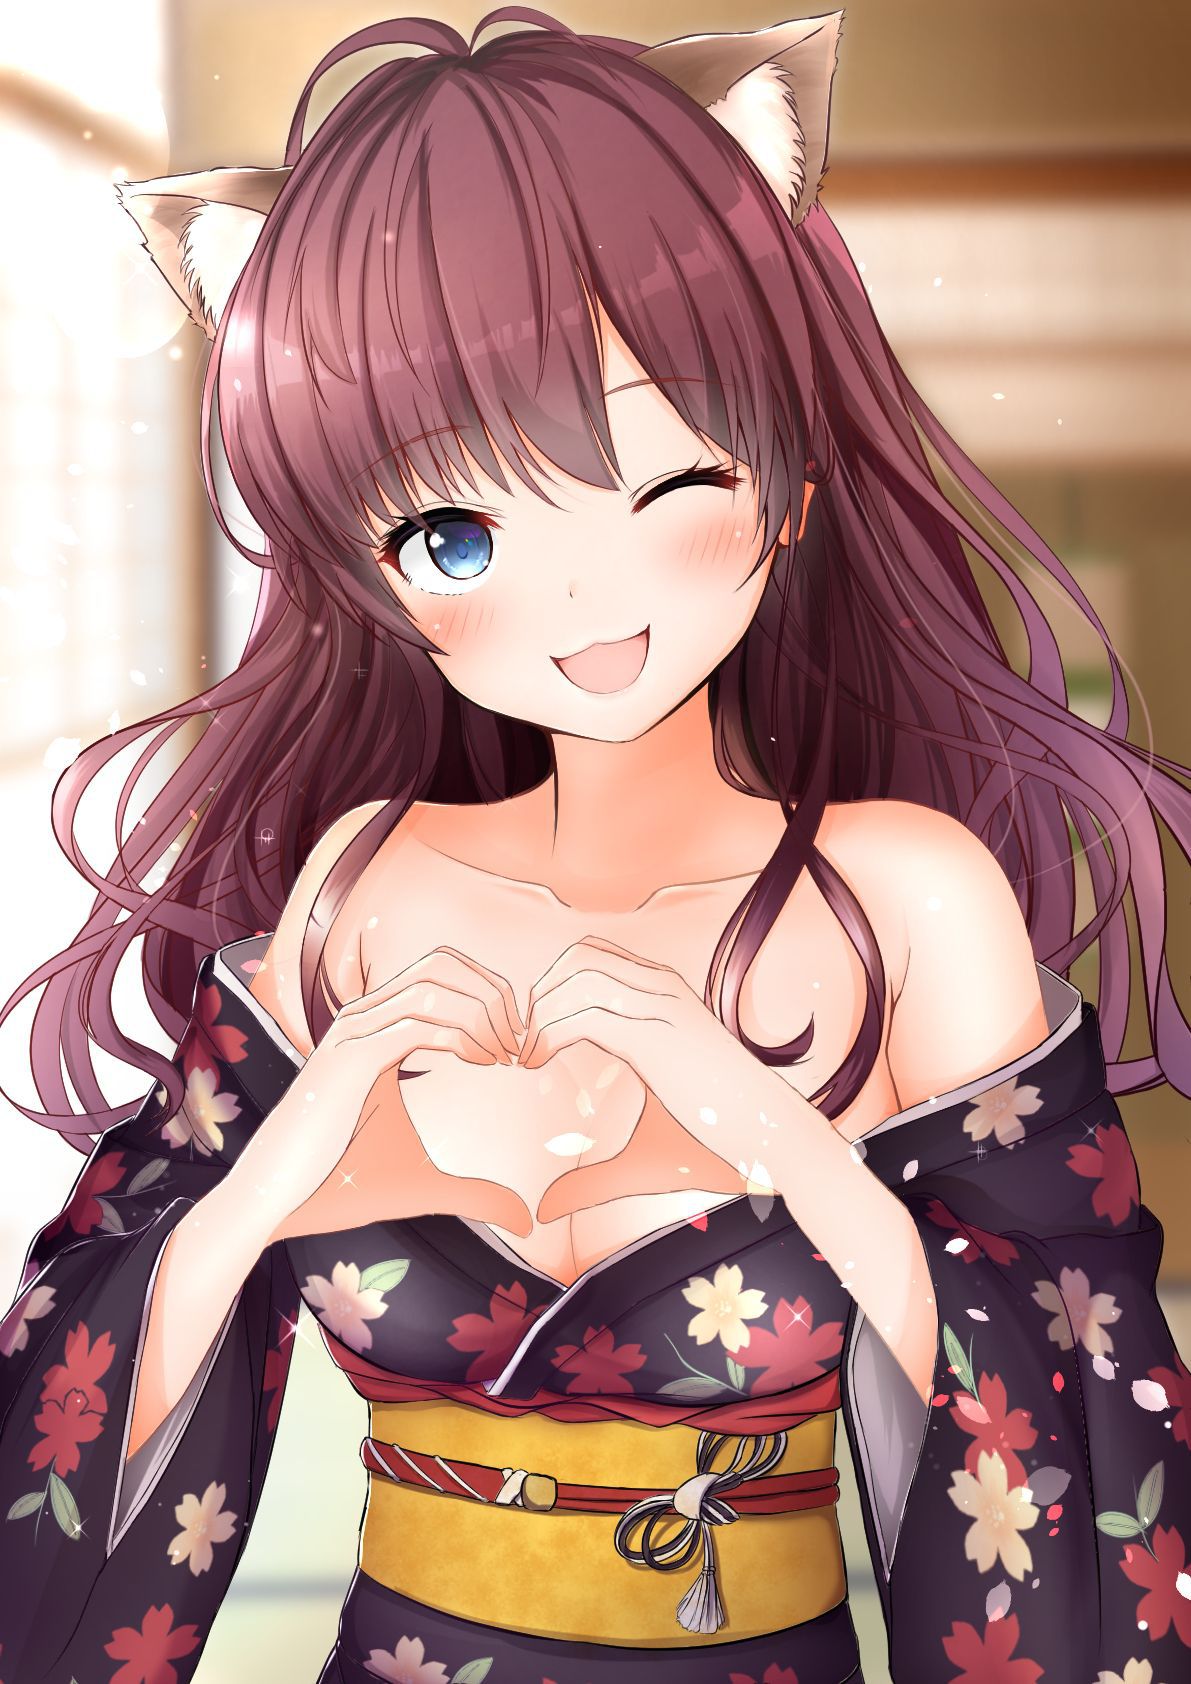 [Secondary, ZIP] smell fetish de mas, ichinose shiki cute picture summary 100 pieces 68